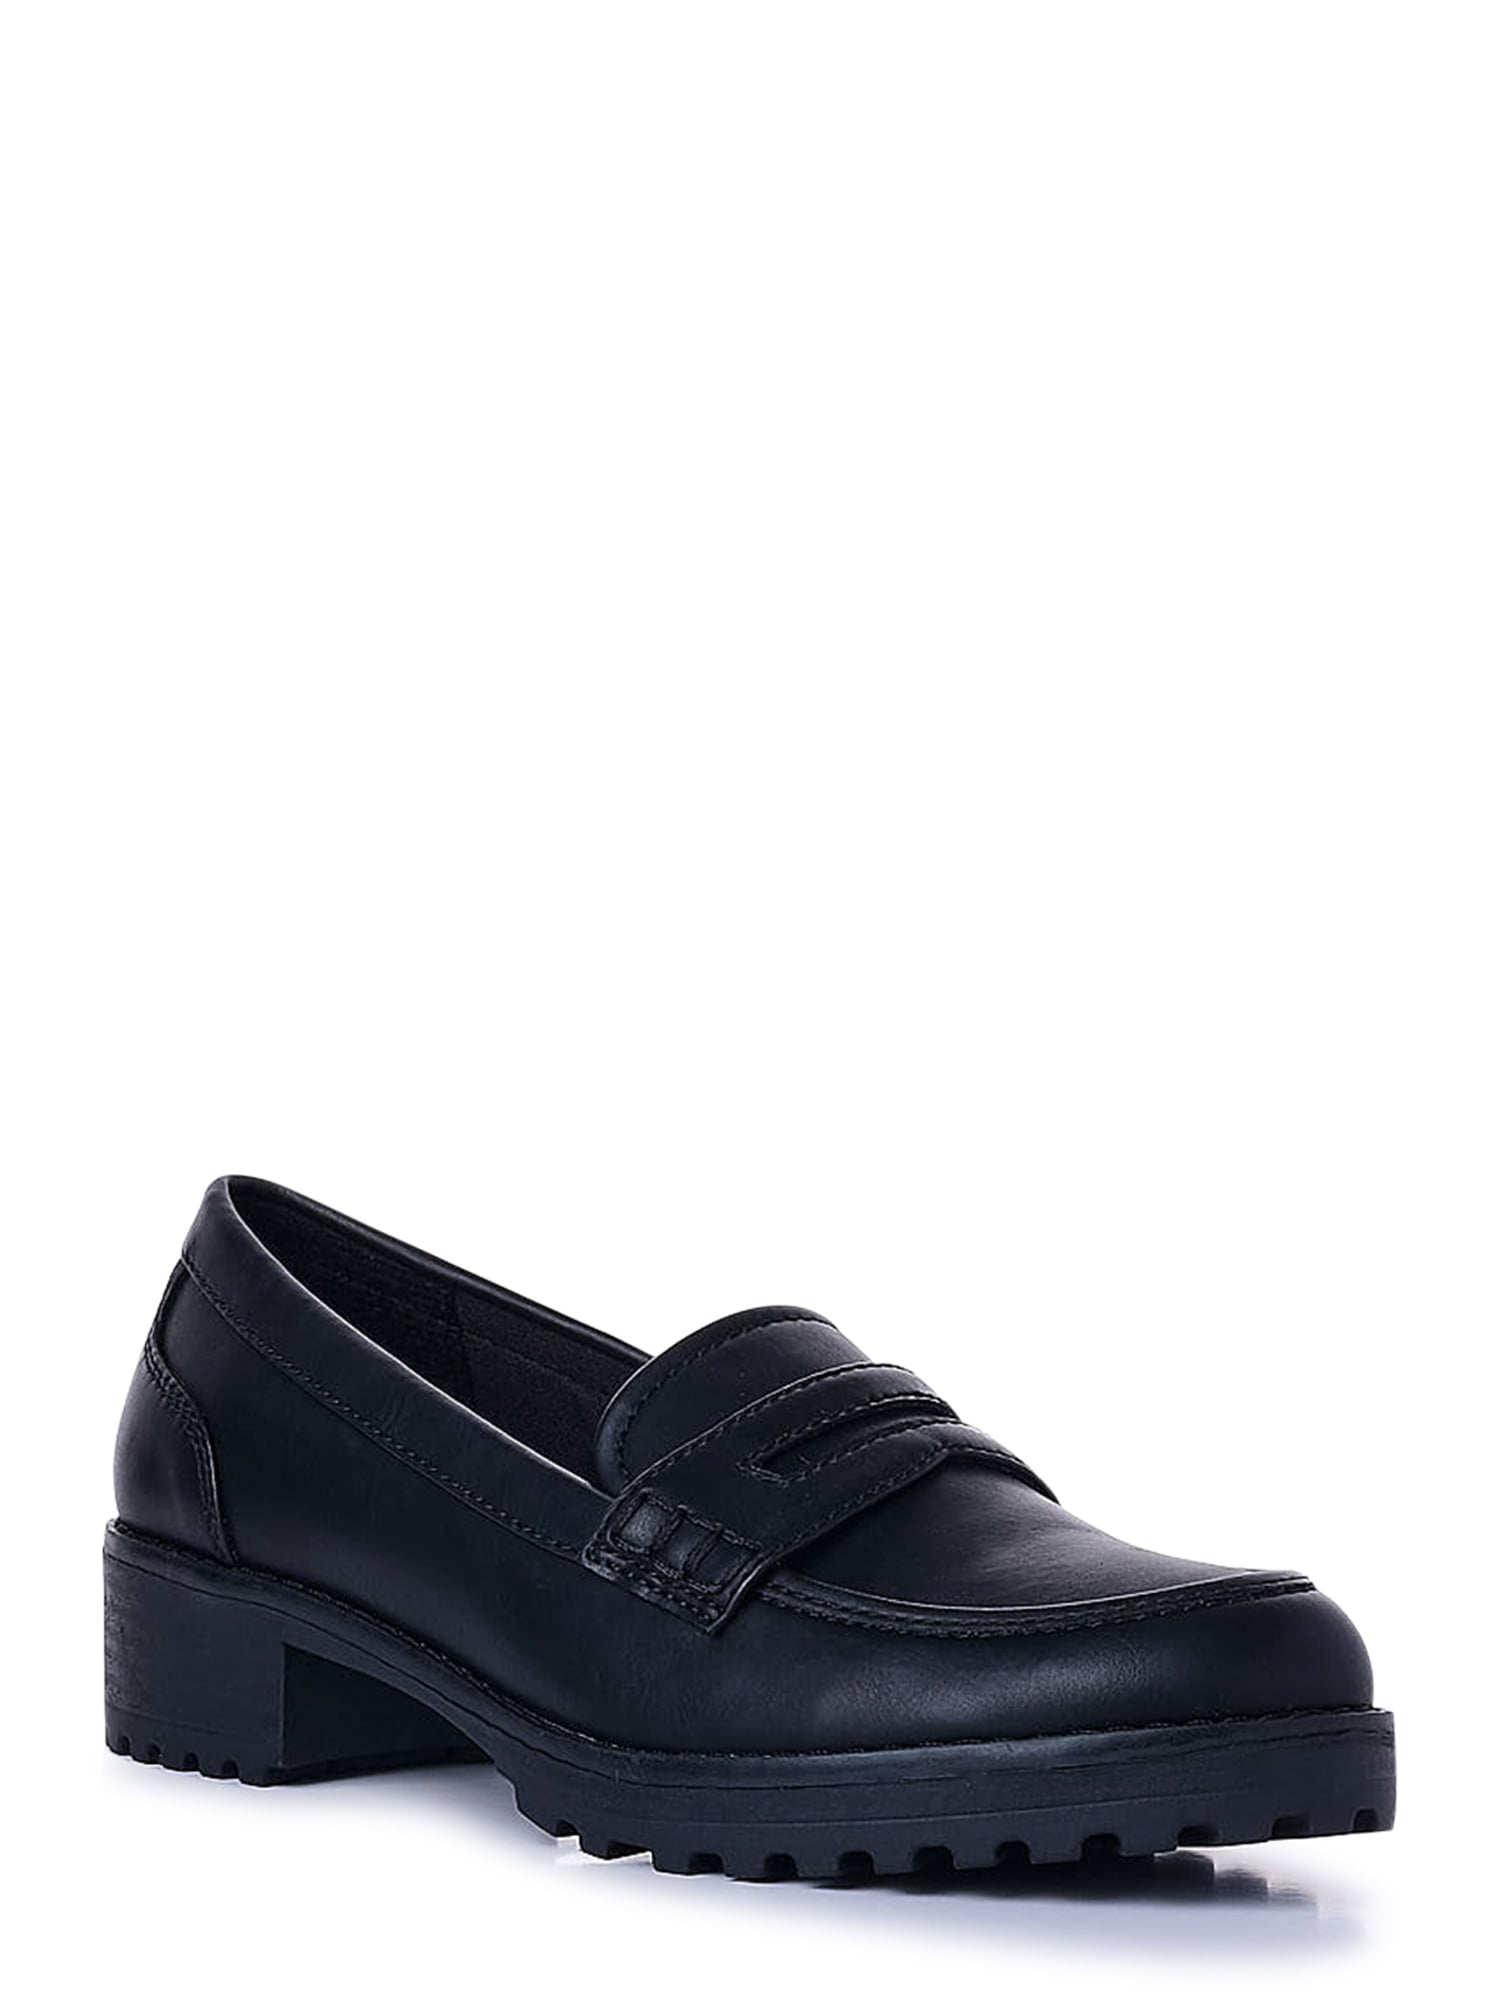 Time and Tru Women's Penny Loafer Walmart.com